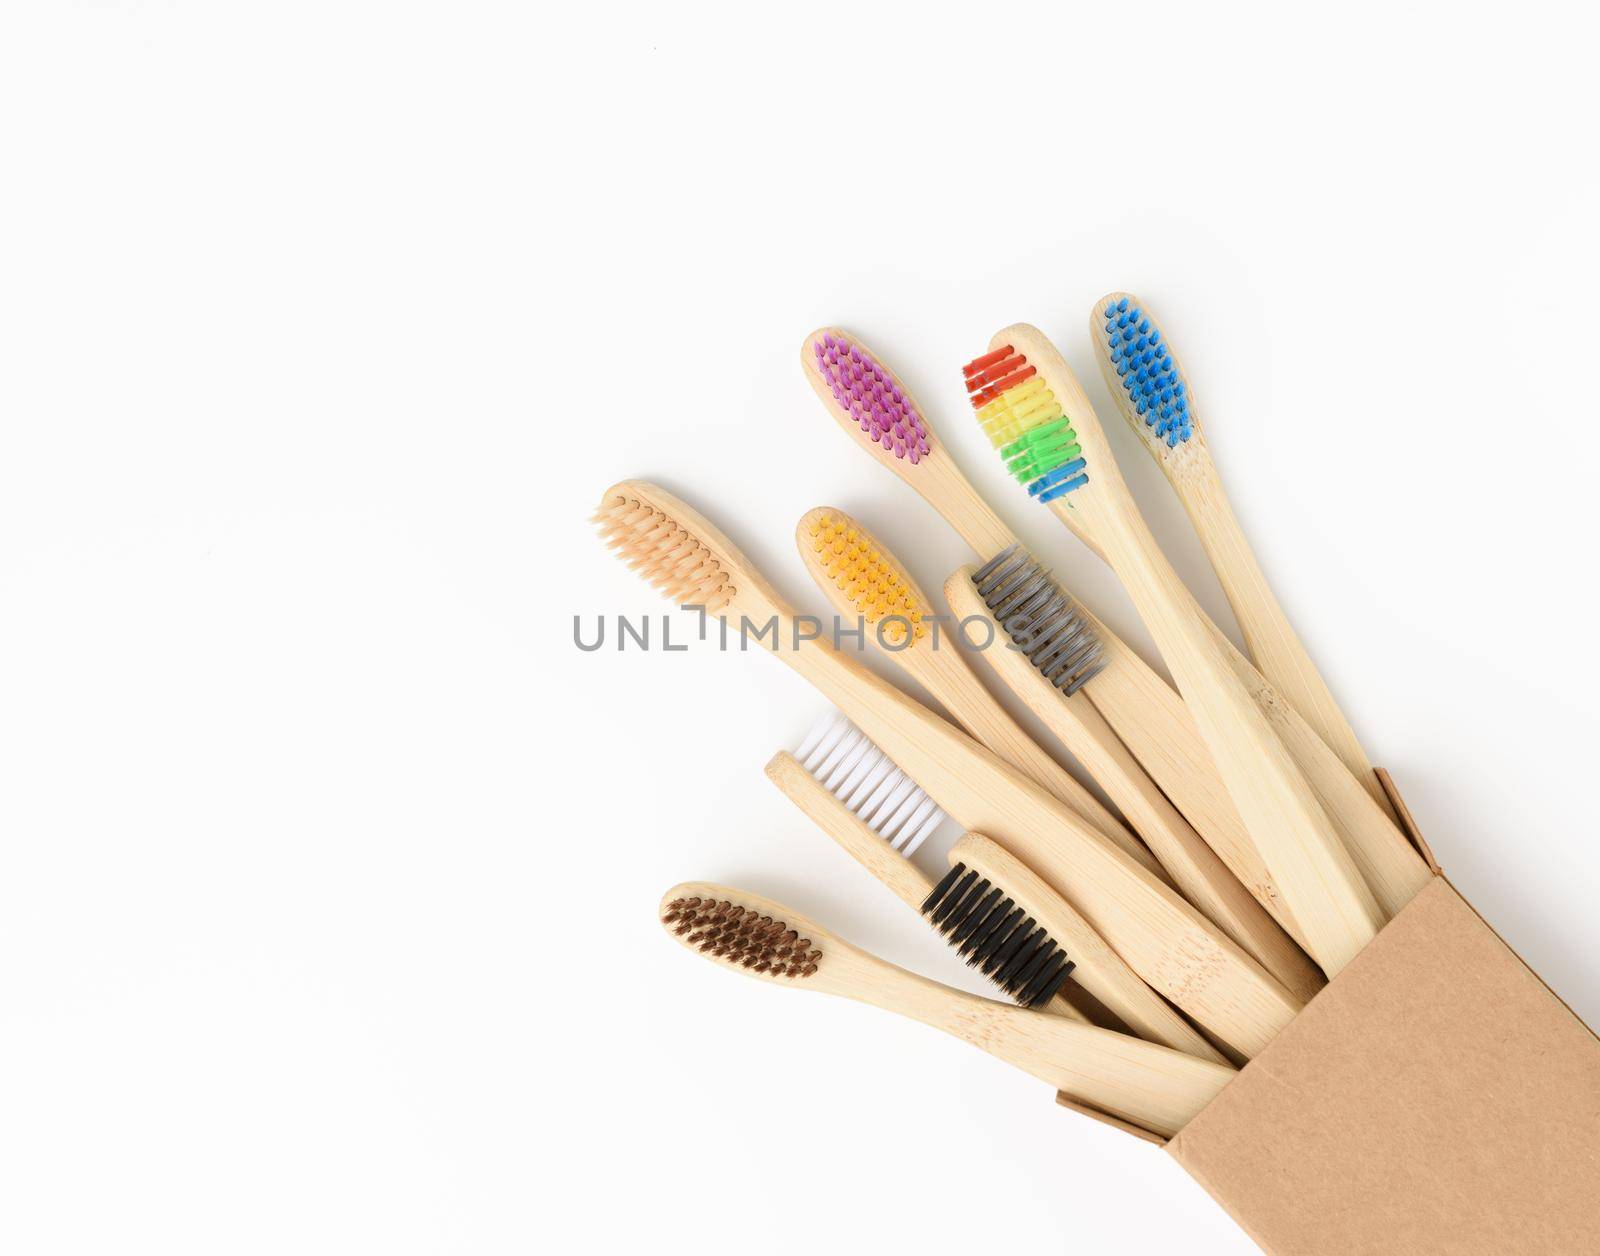 multicolored wooden toothbrushes on a white background, plastic rejection concept, zero waste, close up